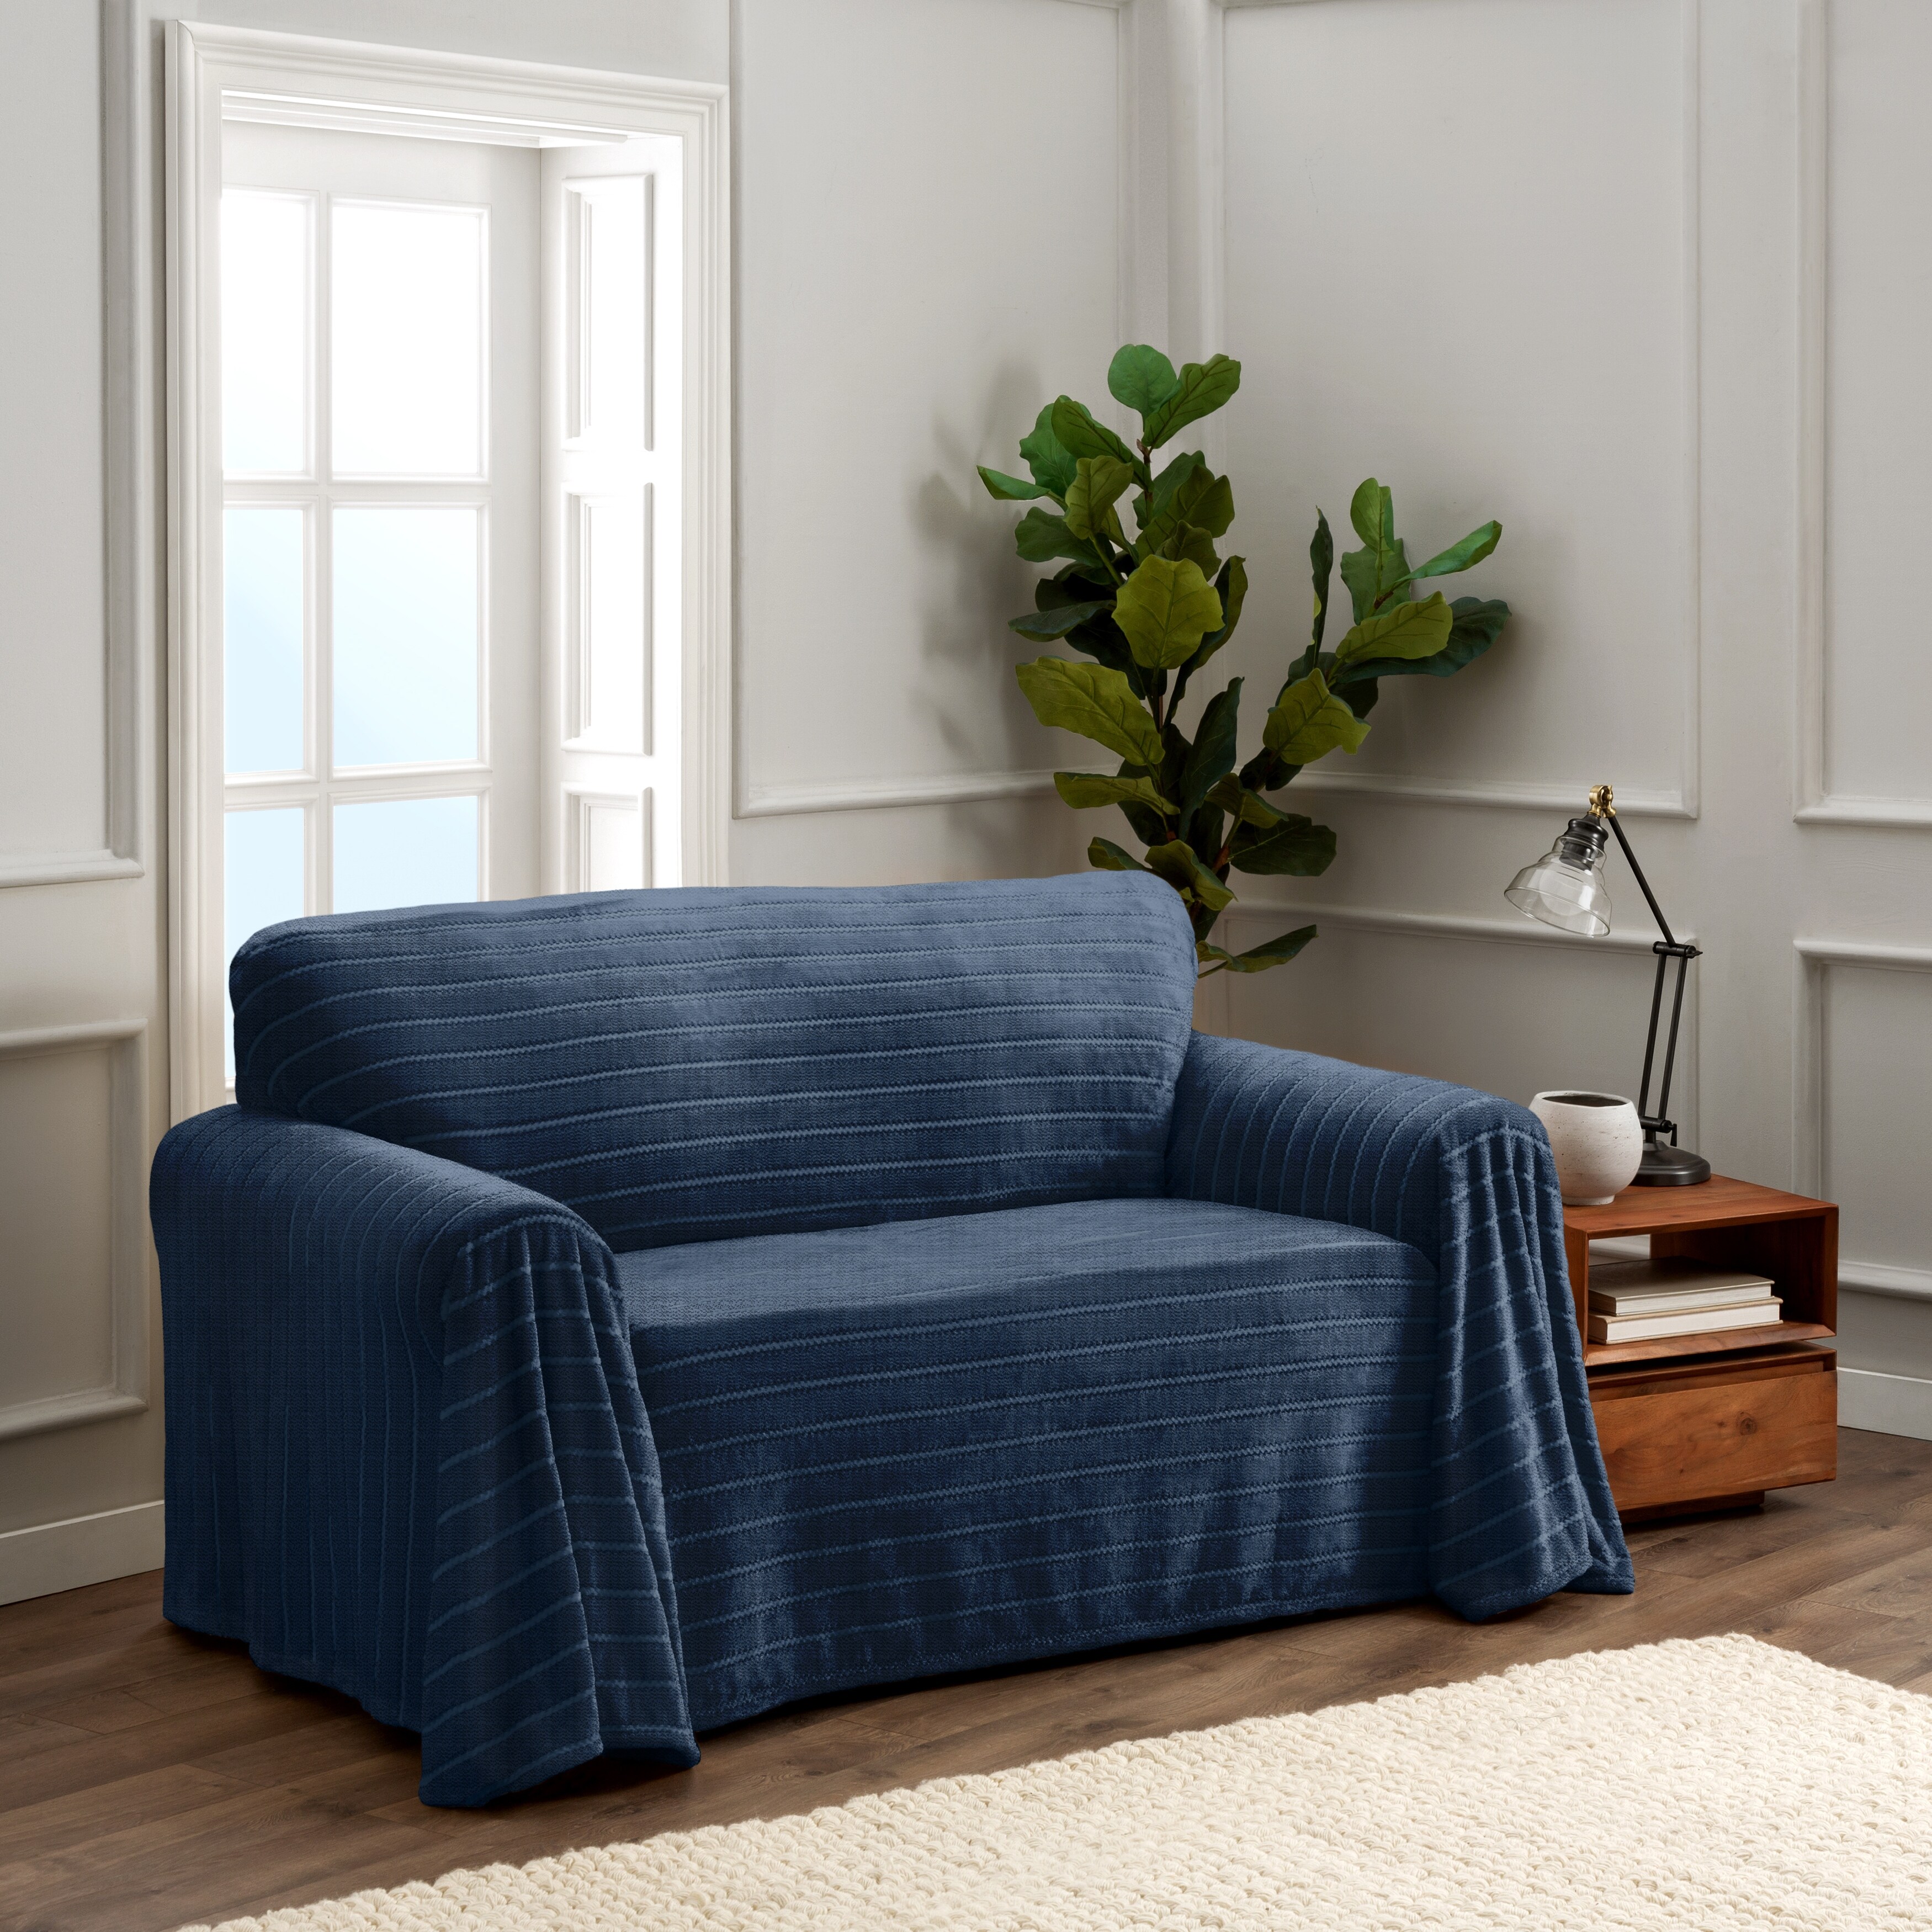 https://ak1.ostkcdn.com/images/products/is/images/direct/449f0fb07f0adfff233f5d2593a423a76f6c260f/Innovative-Textile-Solutions-Nolan-Cozy-Loveseat-Cover.jpg